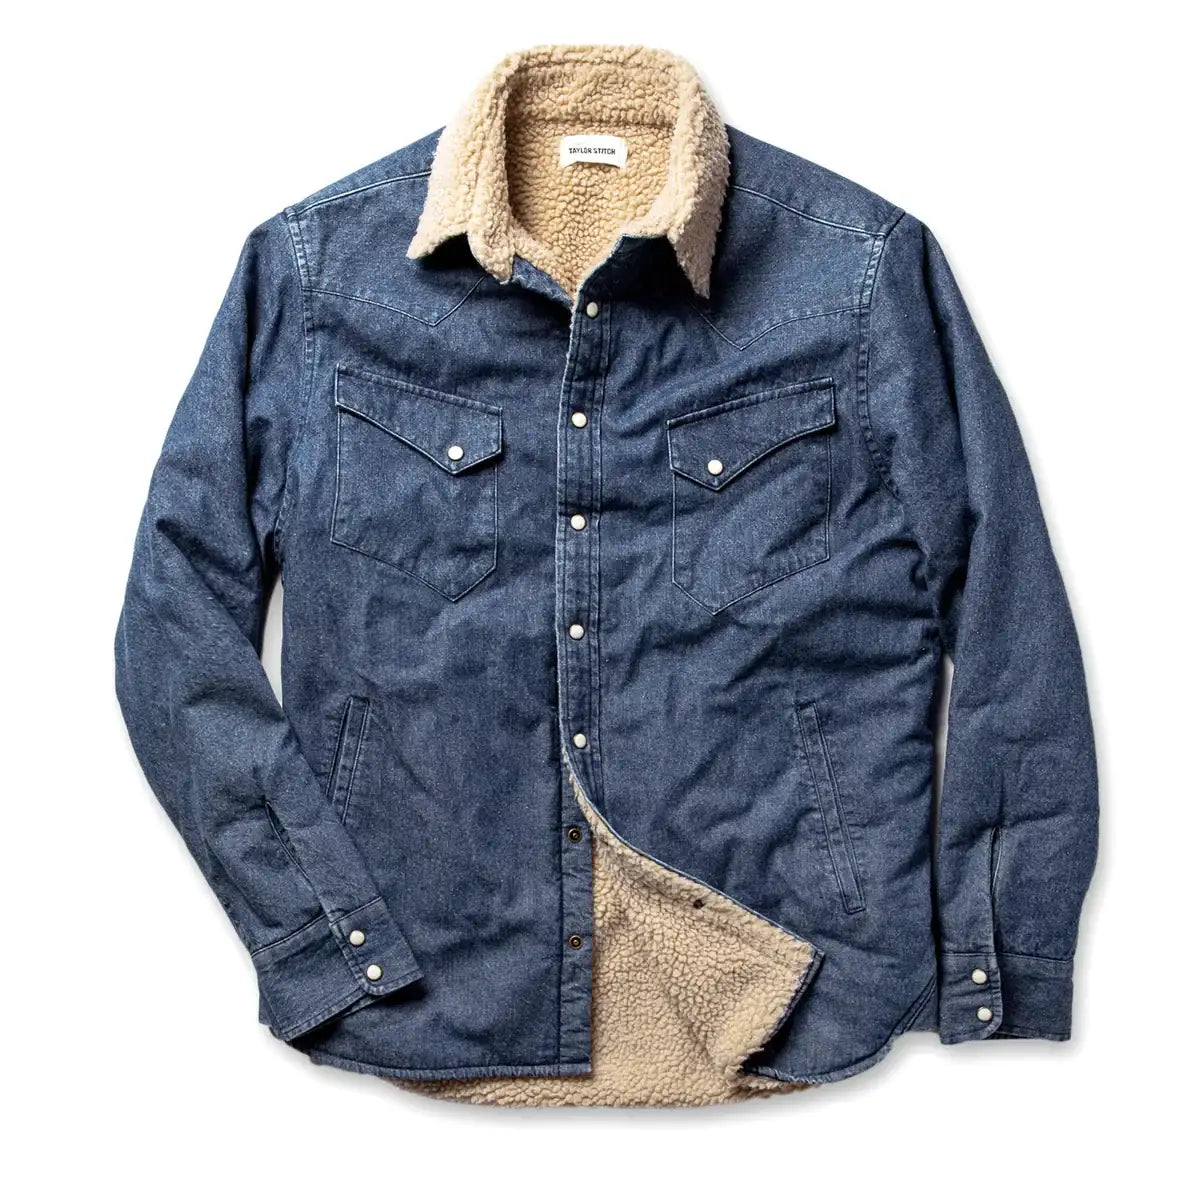 Taylor Stitch - TAYLOR STITCH THE WESTERN SHIRT JACKET IN WASHED INDIGO - Rent With Thred